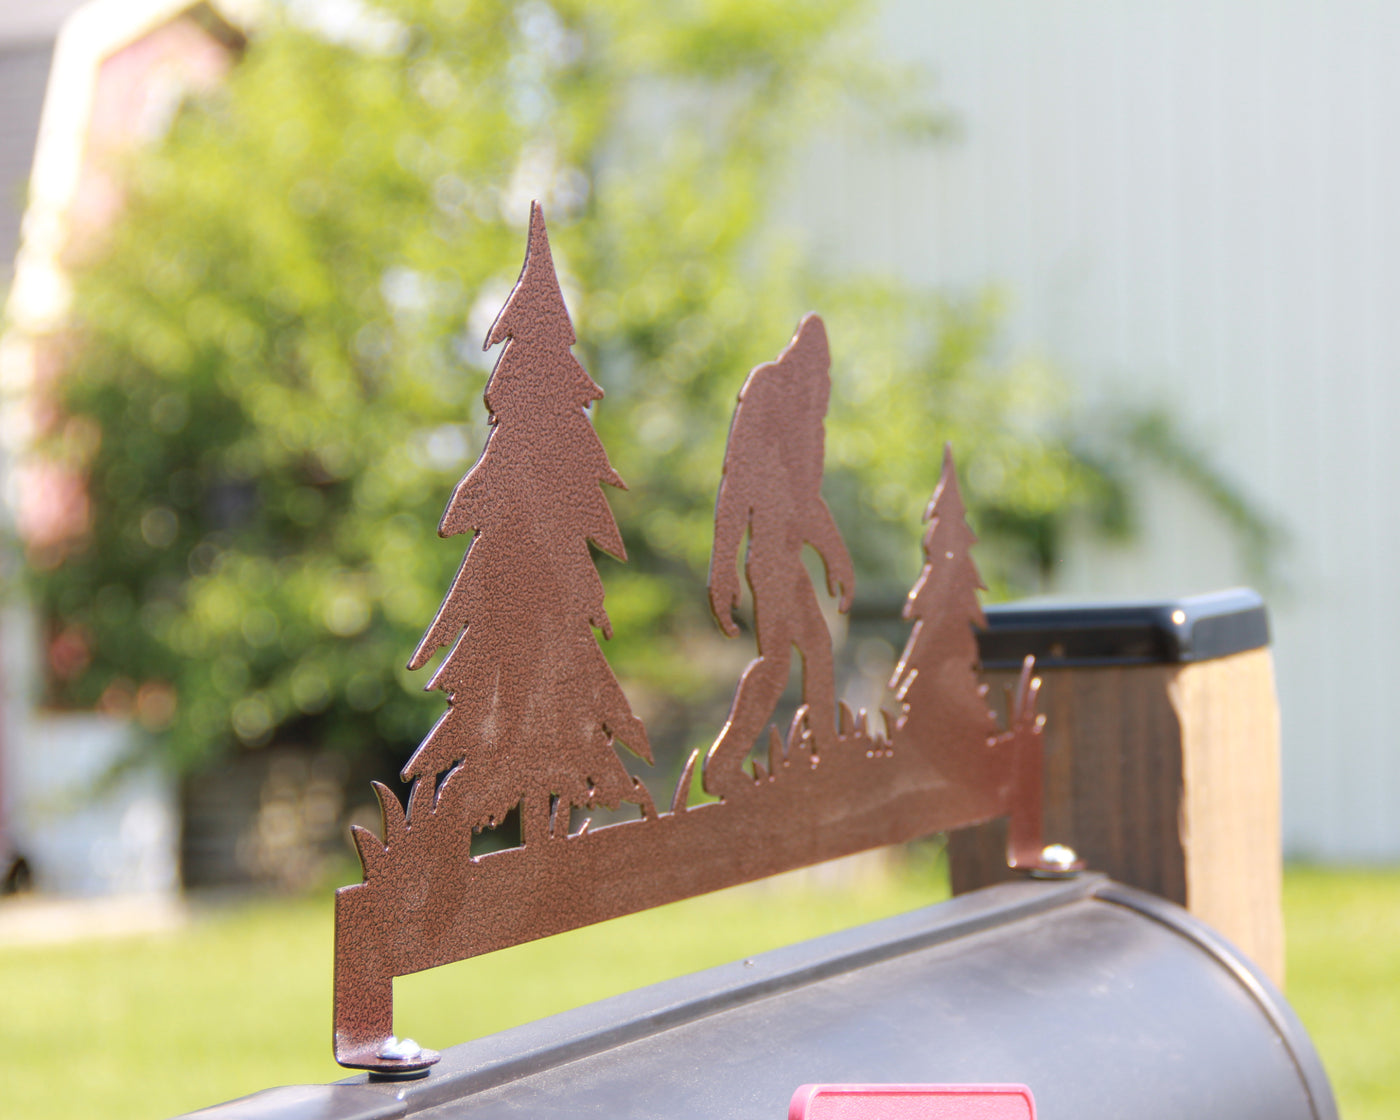 Sasquatch Mailbox Topper - Madison Iron and Wood - Mailbox Post Decor - metal outdoor decor - Steel deocrations - american made products - veteran owned business products - fencing decorations - fencing supplies - custom wall decorations - personalized wall signs - steel - decorative post caps - steel post caps - metal post caps - brackets - structural brackets - home improvement - easter - easter decorations - easter gift - easter yard decor